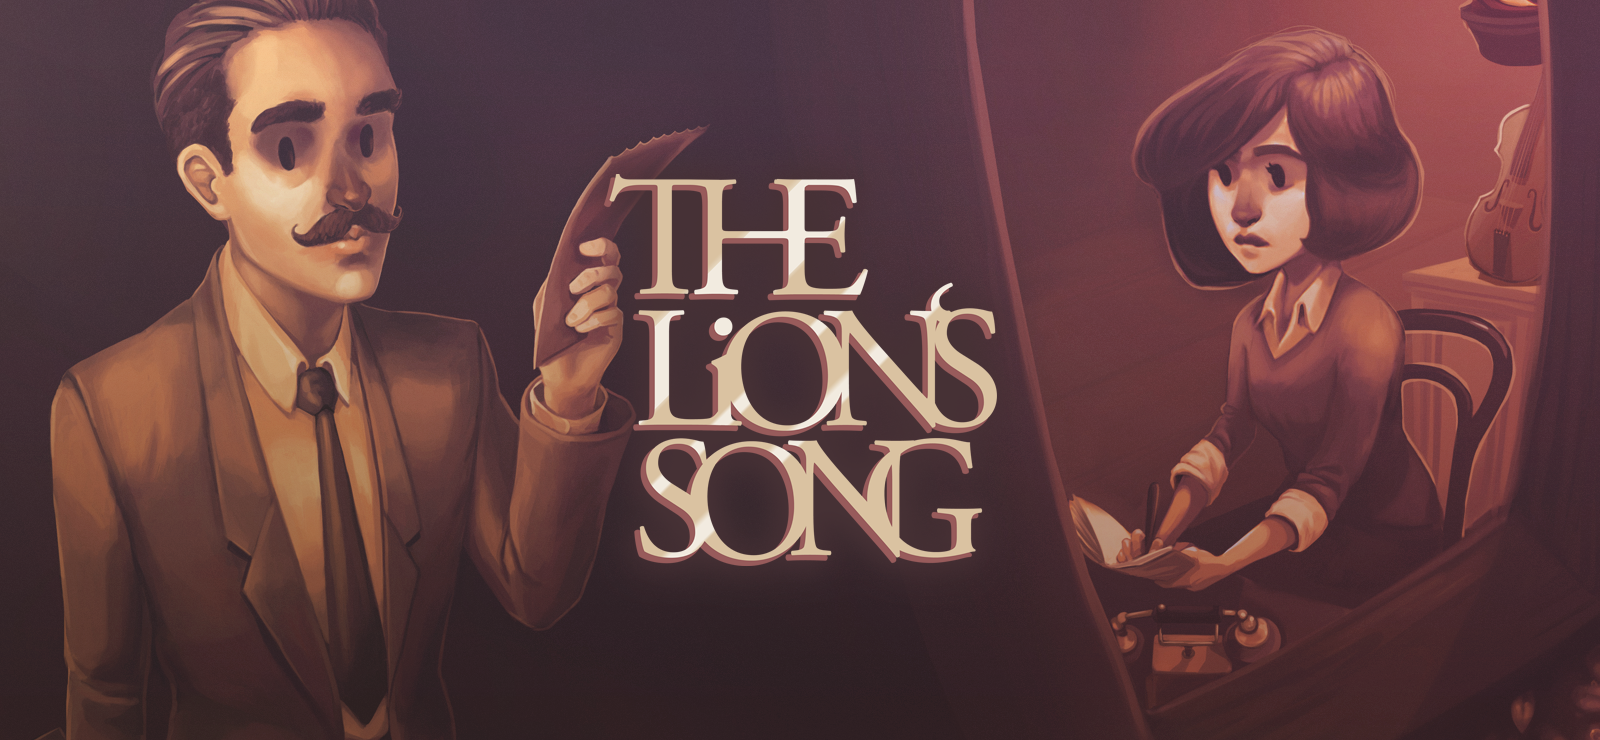 The Lion's Song